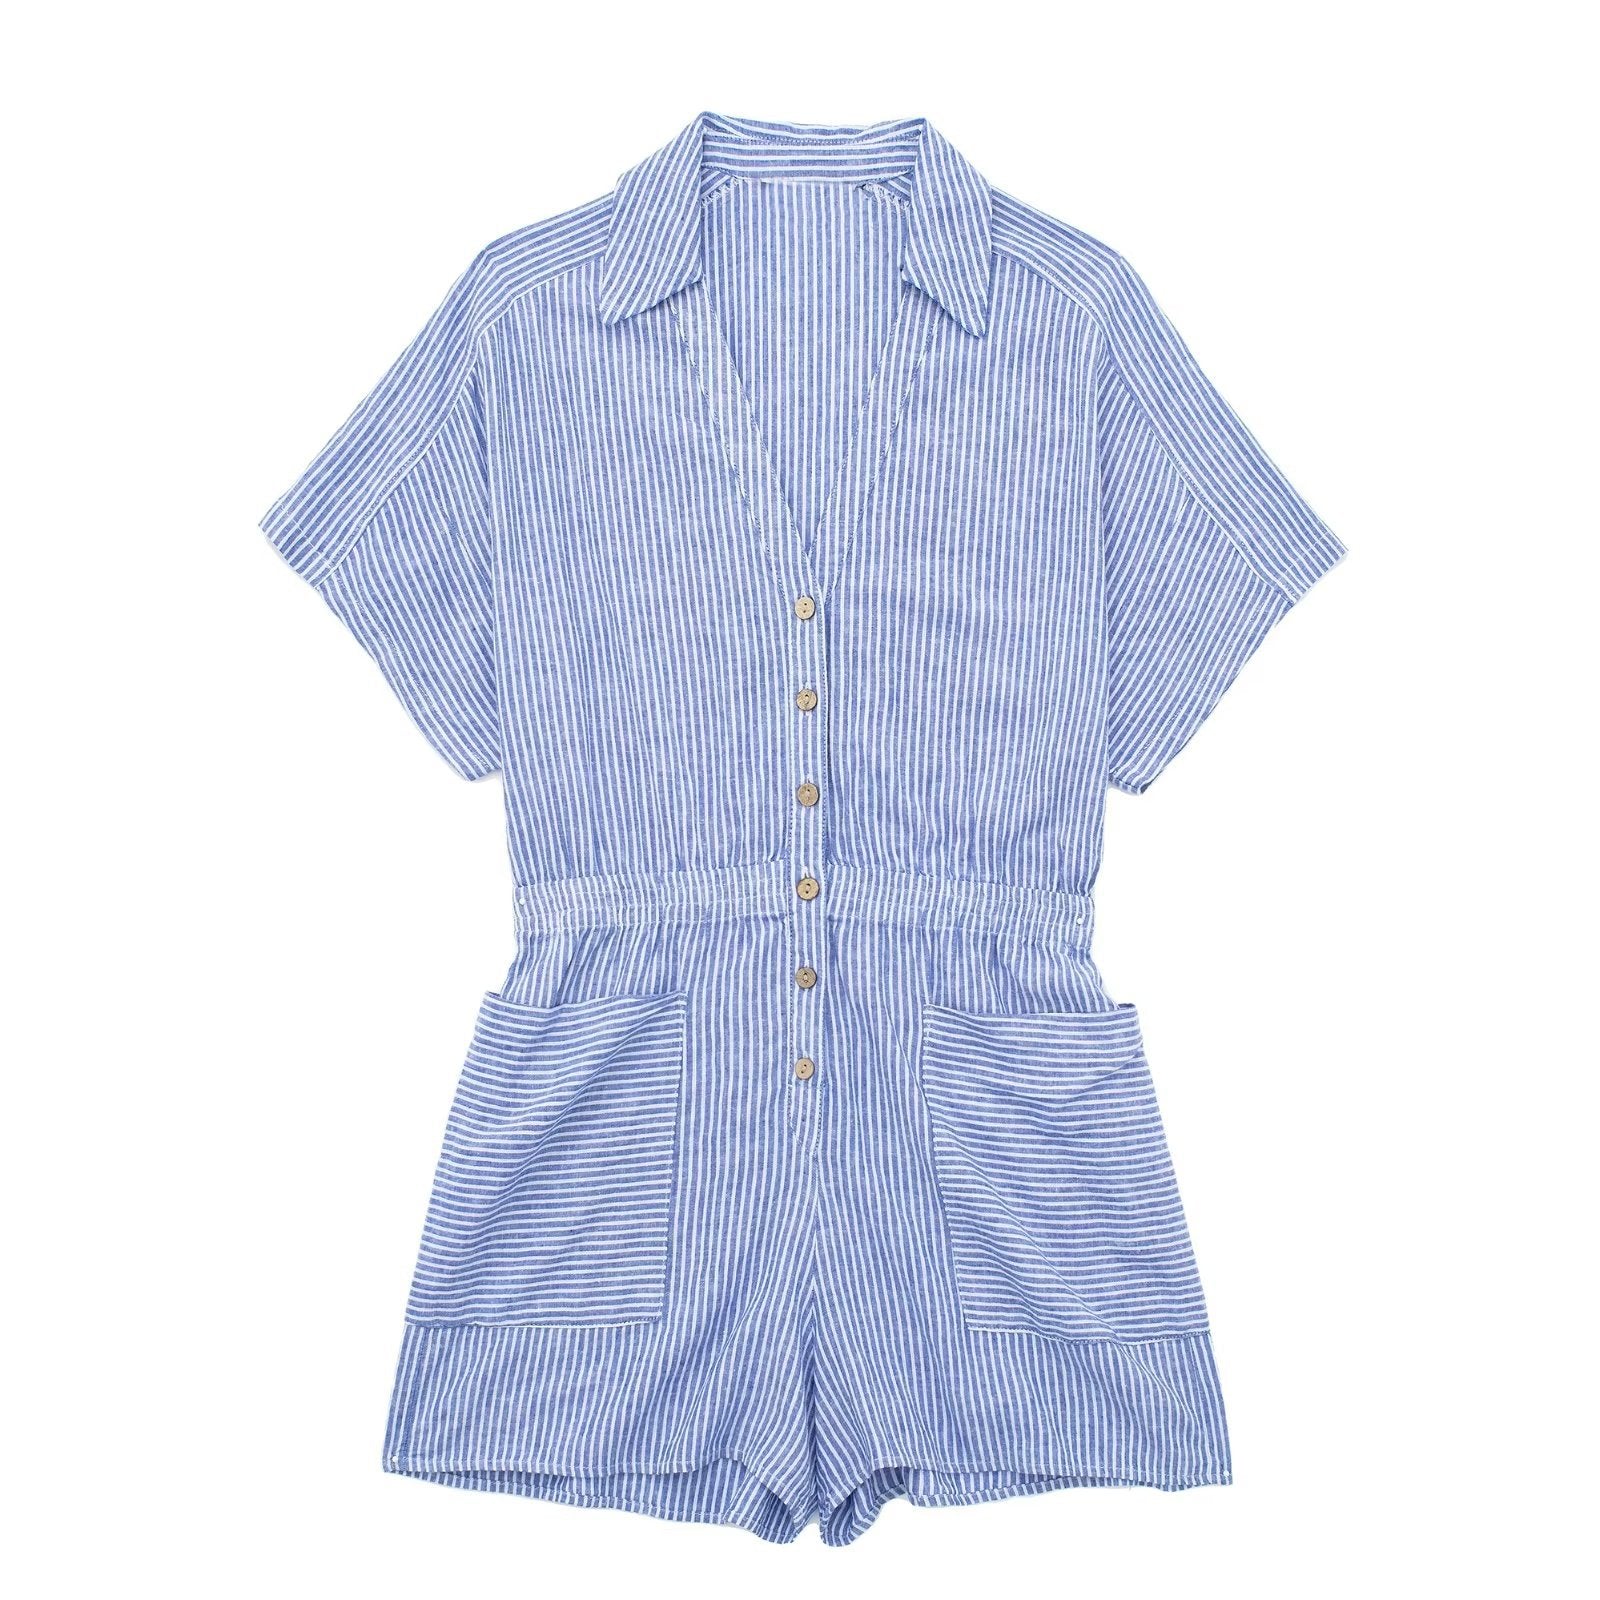 NTG Fad Jumpsuits & Rompers/Jumpsuits Stripe / L Spring linen-blend striped cropped playsuit